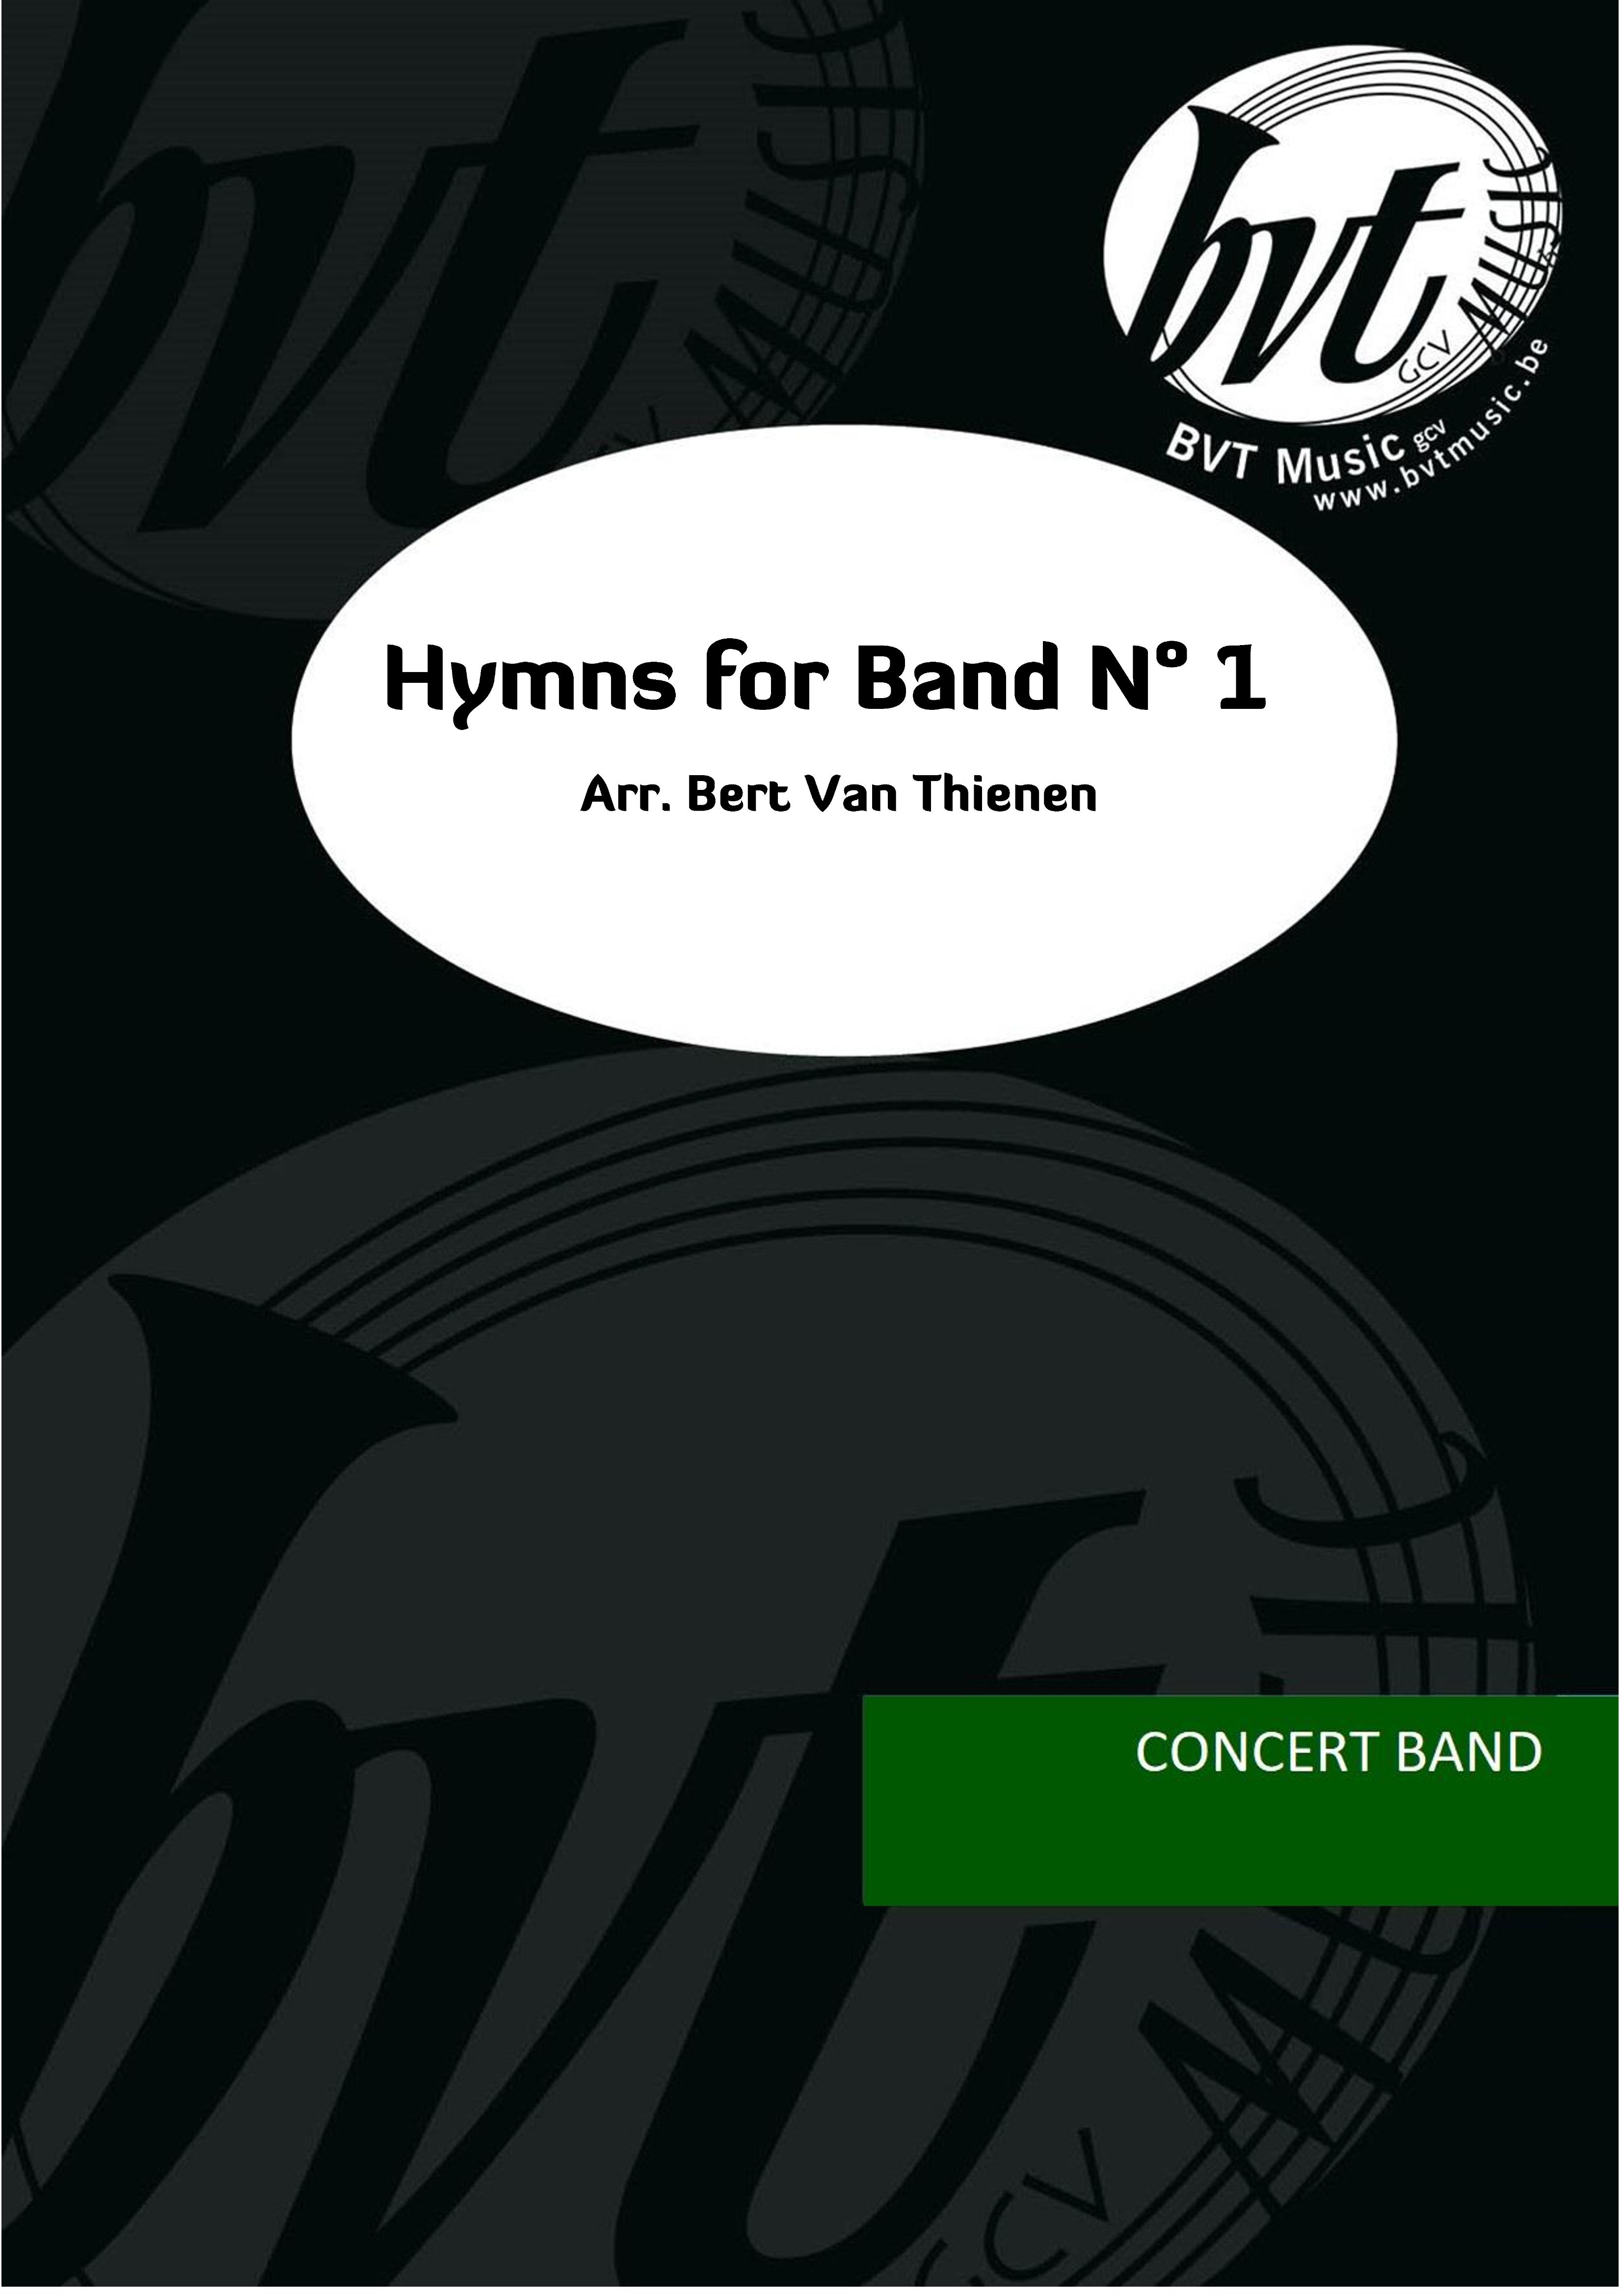 Hymns for Band N° 1 (CB)